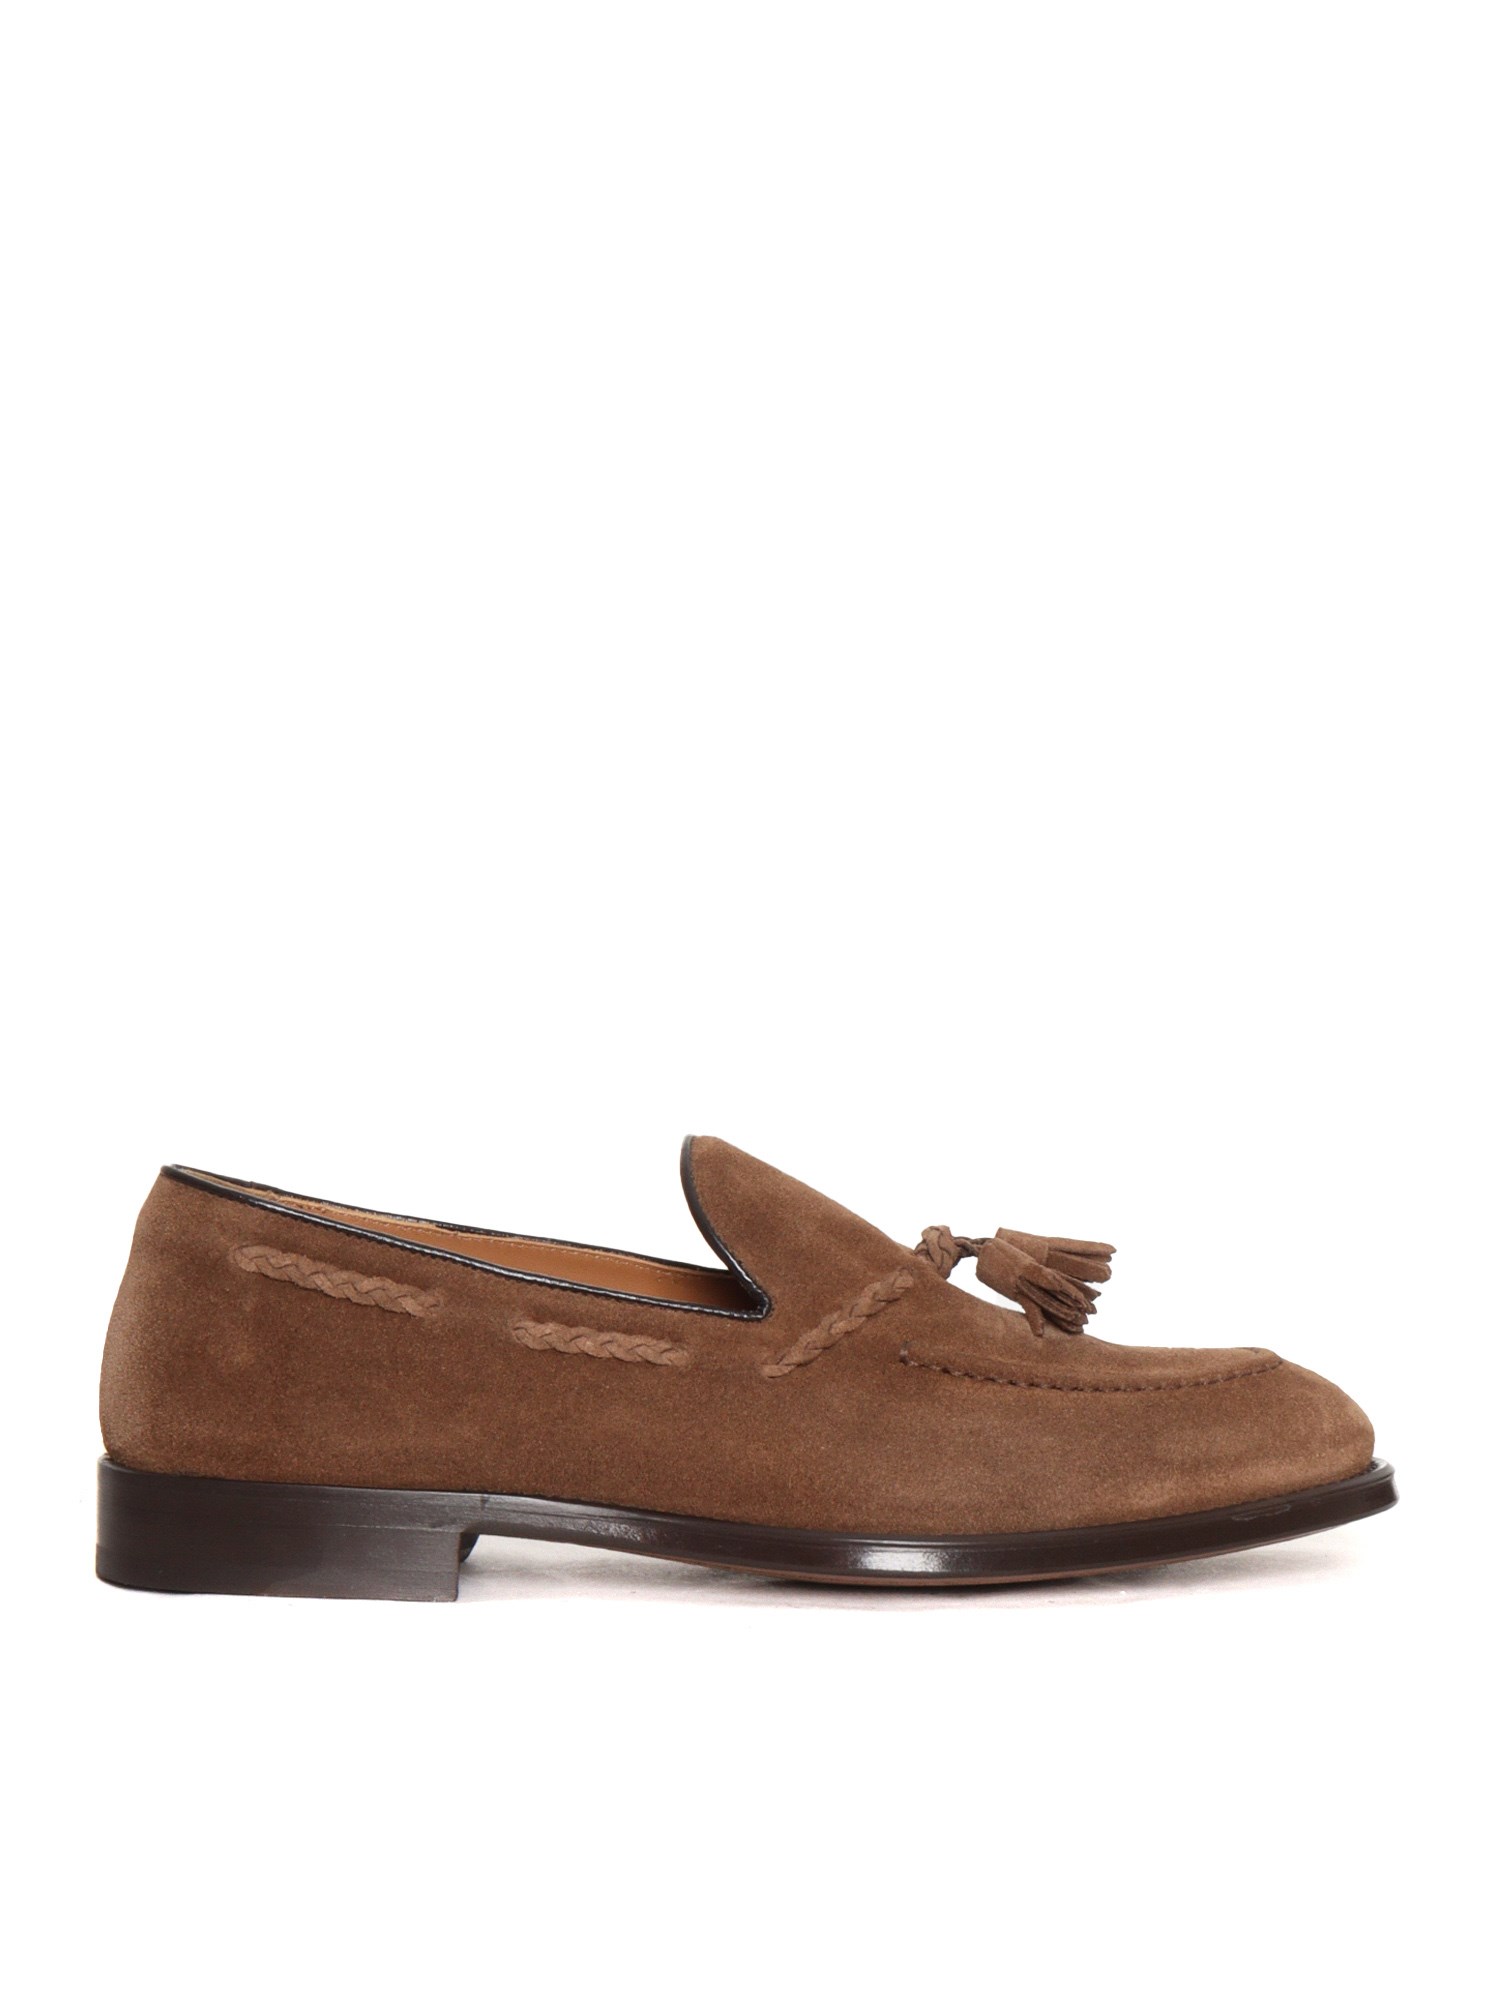 Doucal's Brown Leather Loafer